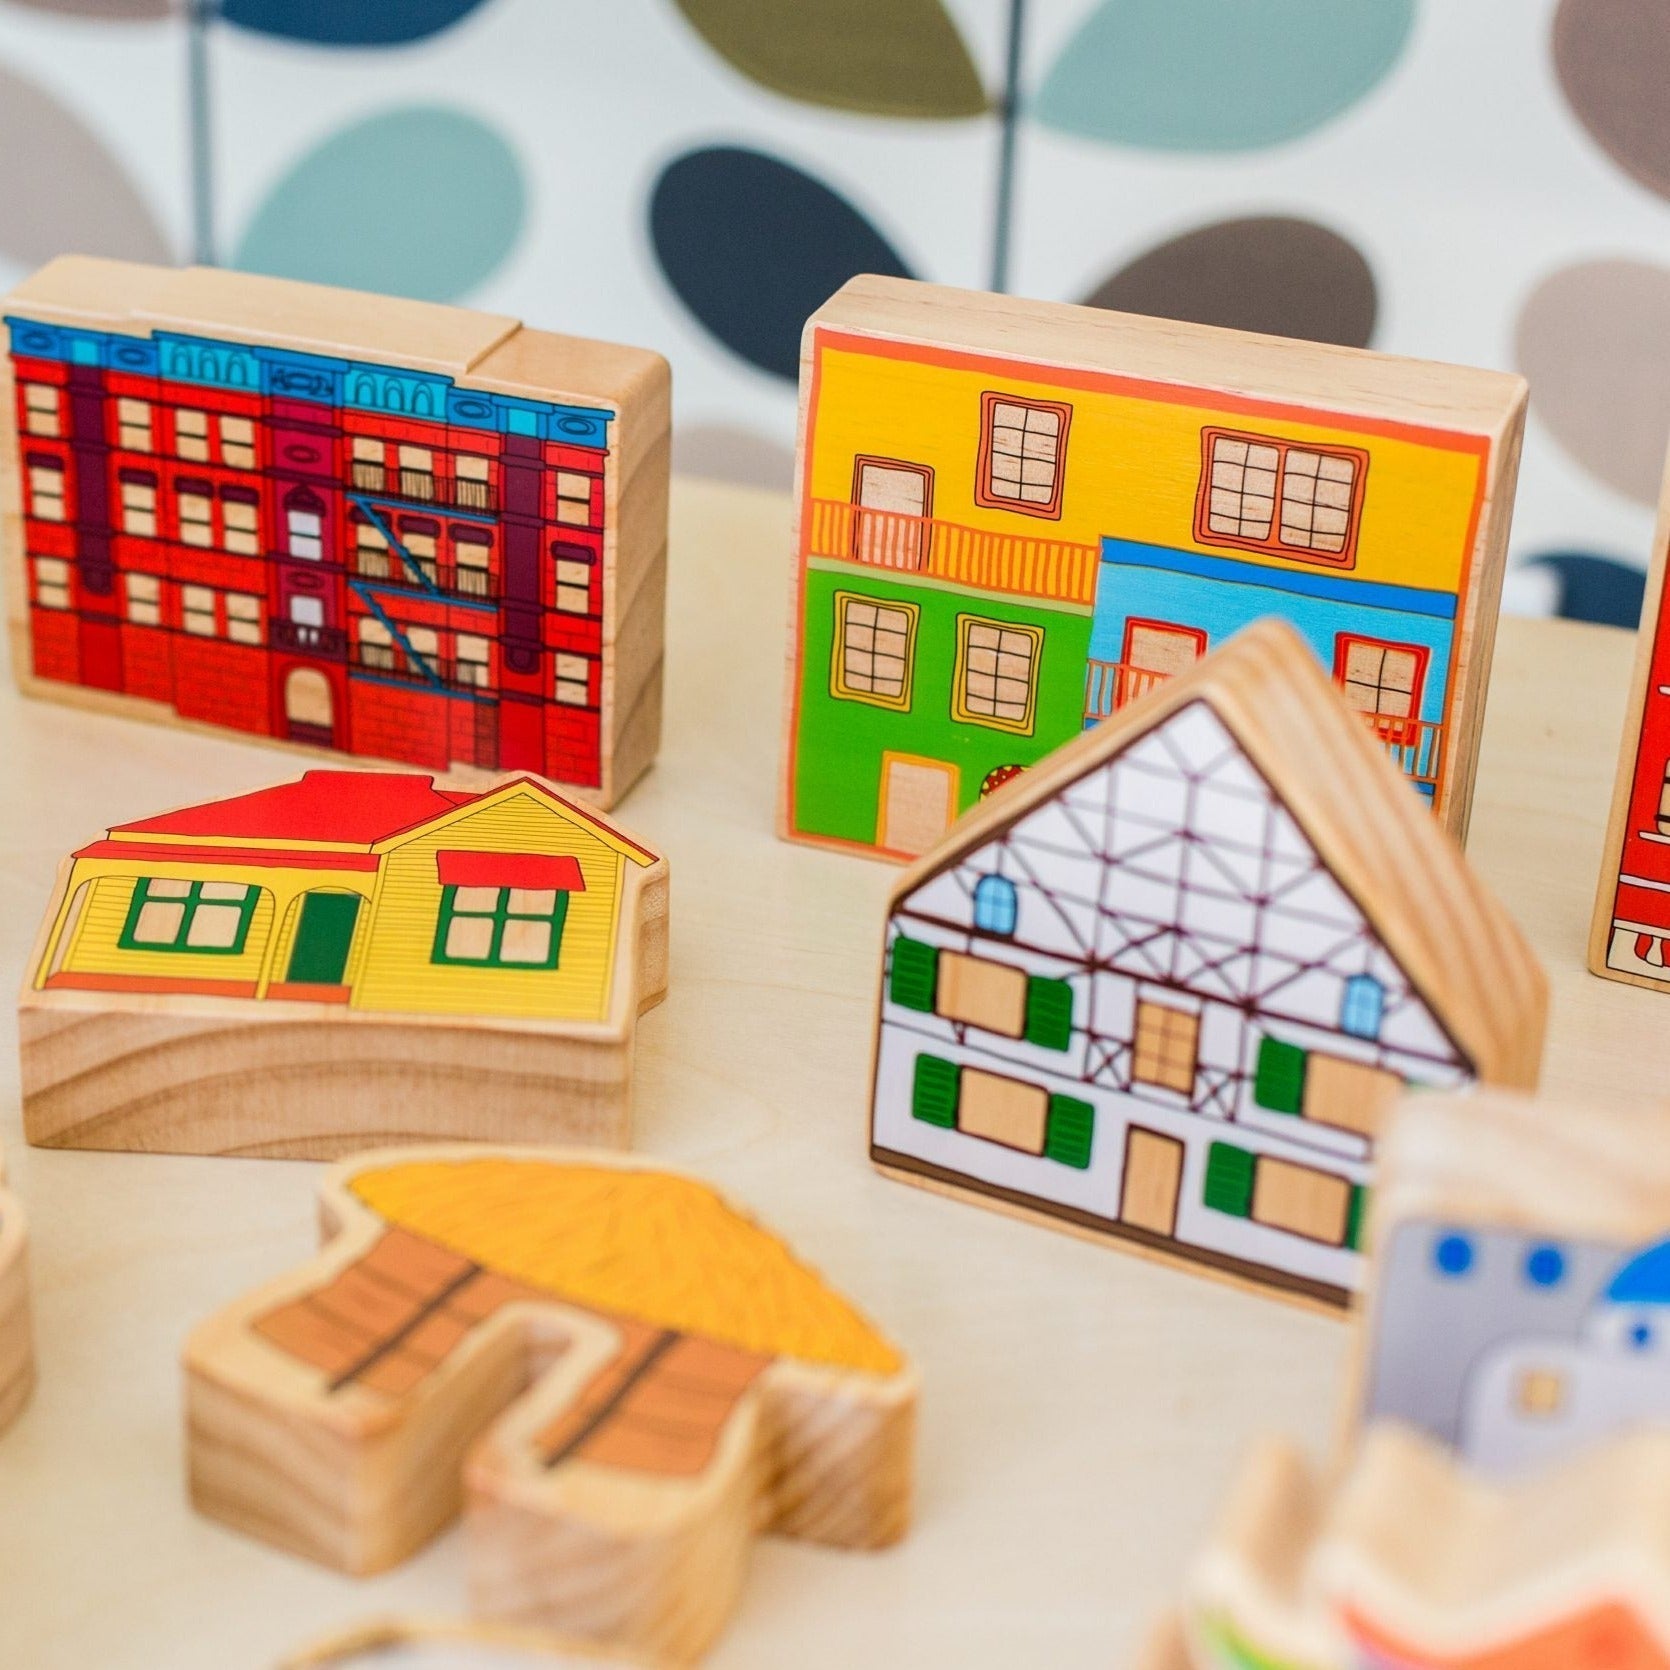 Homes Around the World, Introducing the Freckled Frog Homes around the World wooden block set - a beautifully illustrated and vibrant toy that sparks discussion about inclusion and communities while celebrating the diverse cultures and homes found around the globe. This set includes 15 blocks, each representing a different culture and country, such as Greece, Germany, South America,and China, among others.These wooden blocks are not only visually stunning but also serve as a tool for children's creative pla